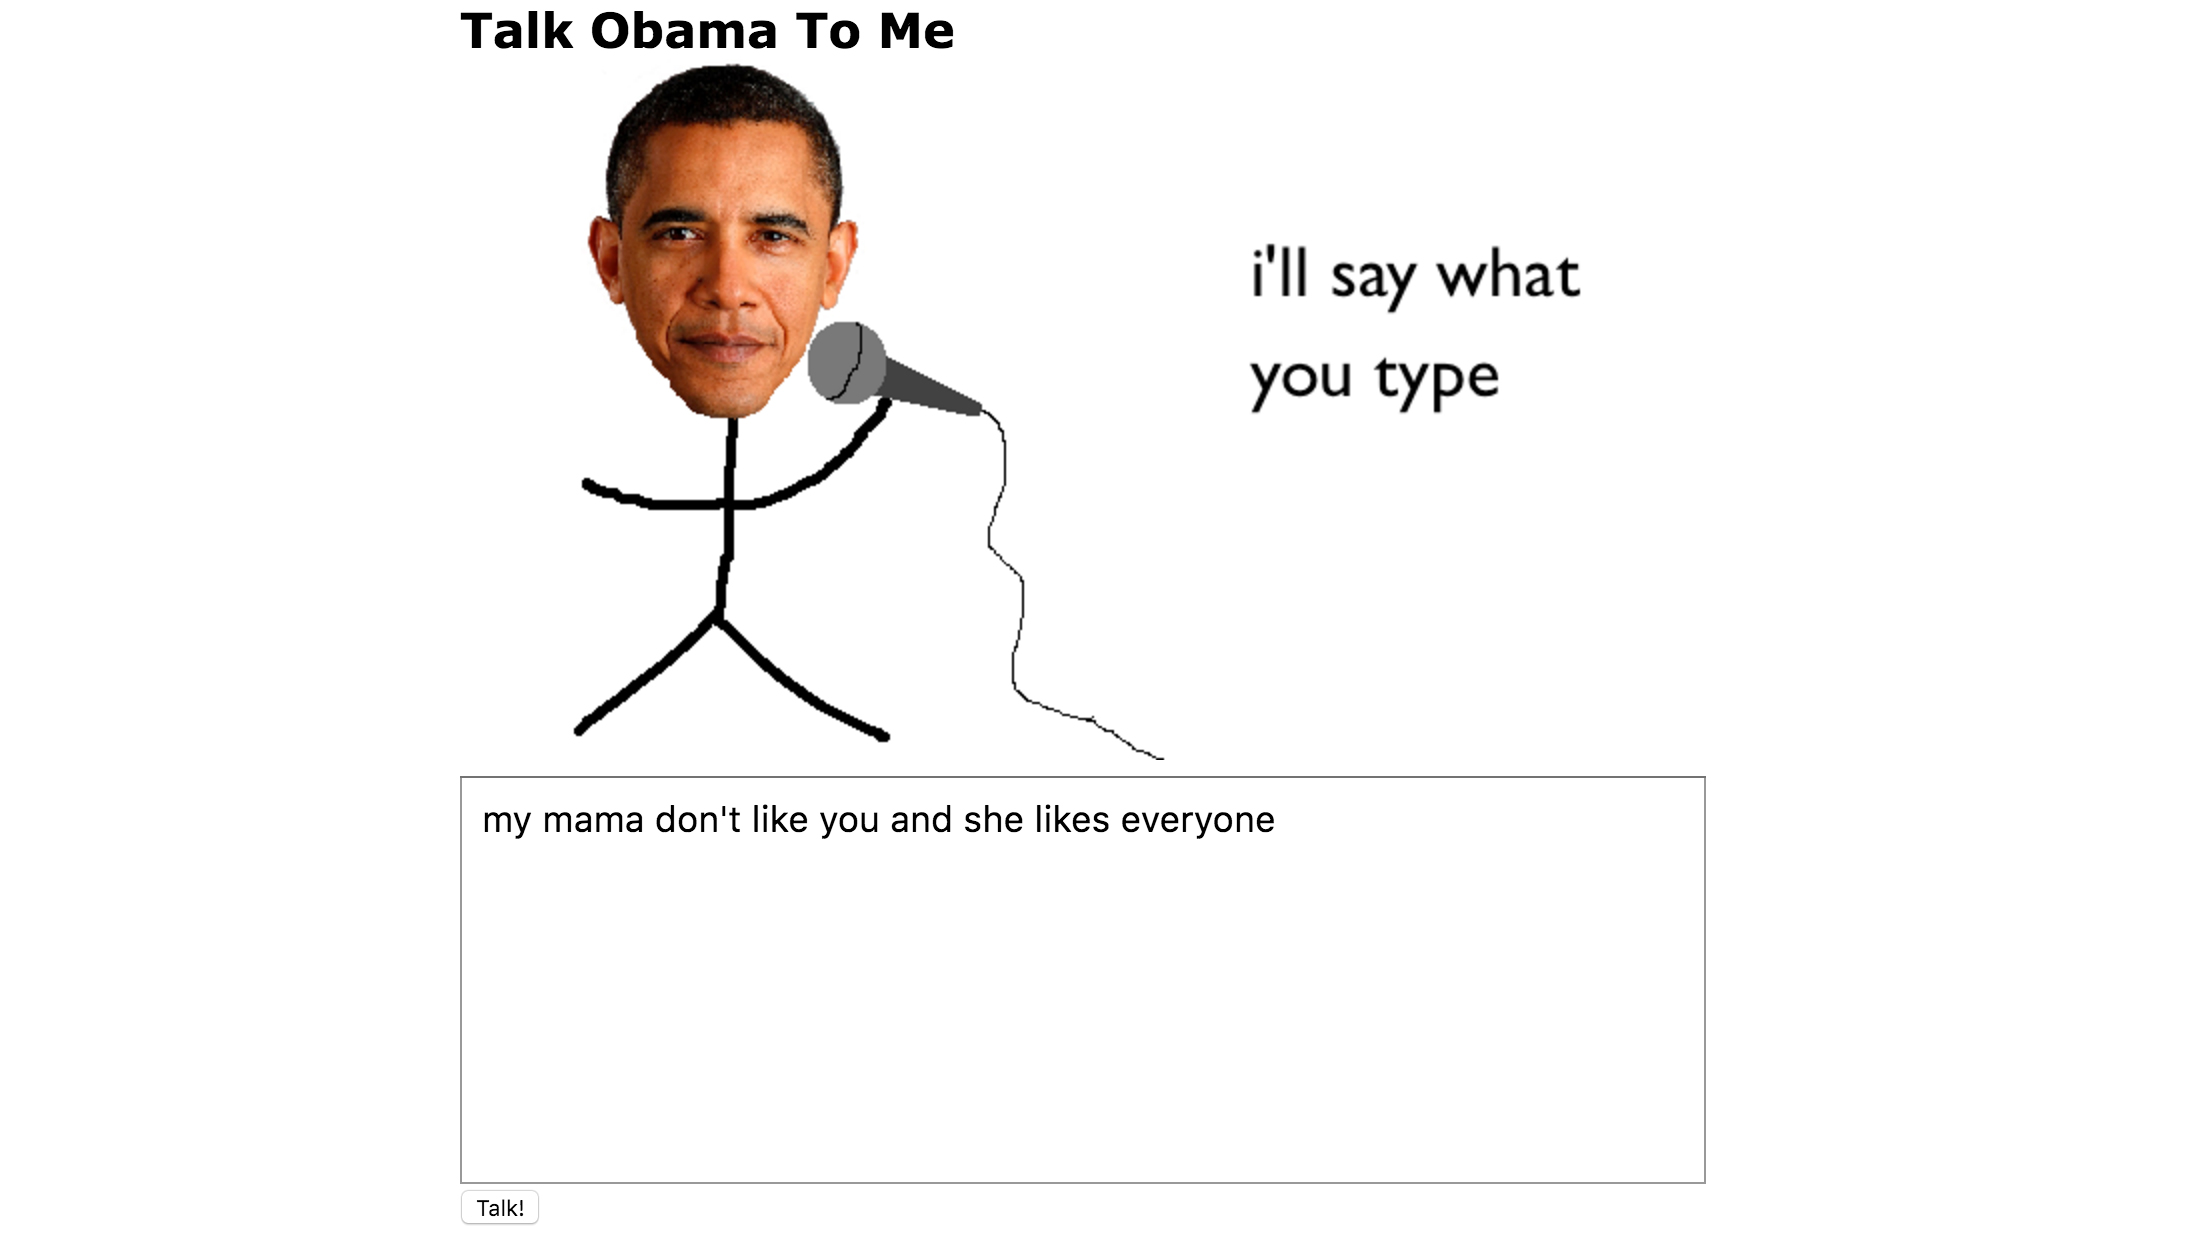 Use This Website To Make Obama Say Anything You Want